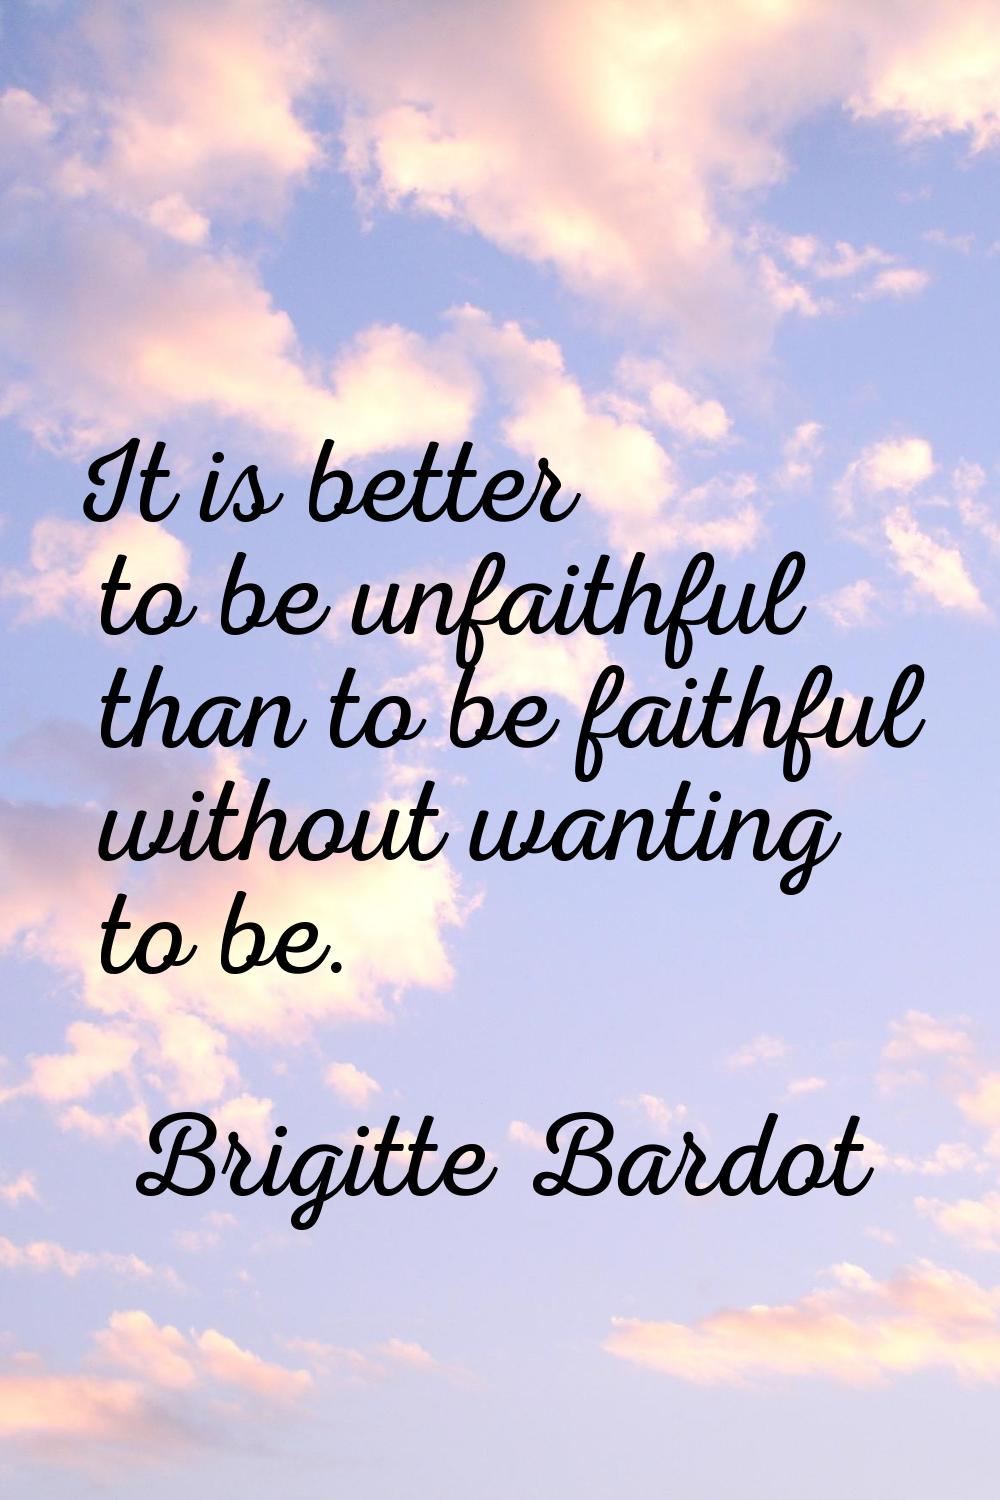 It is better to be unfaithful than to be faithful without wanting to be.